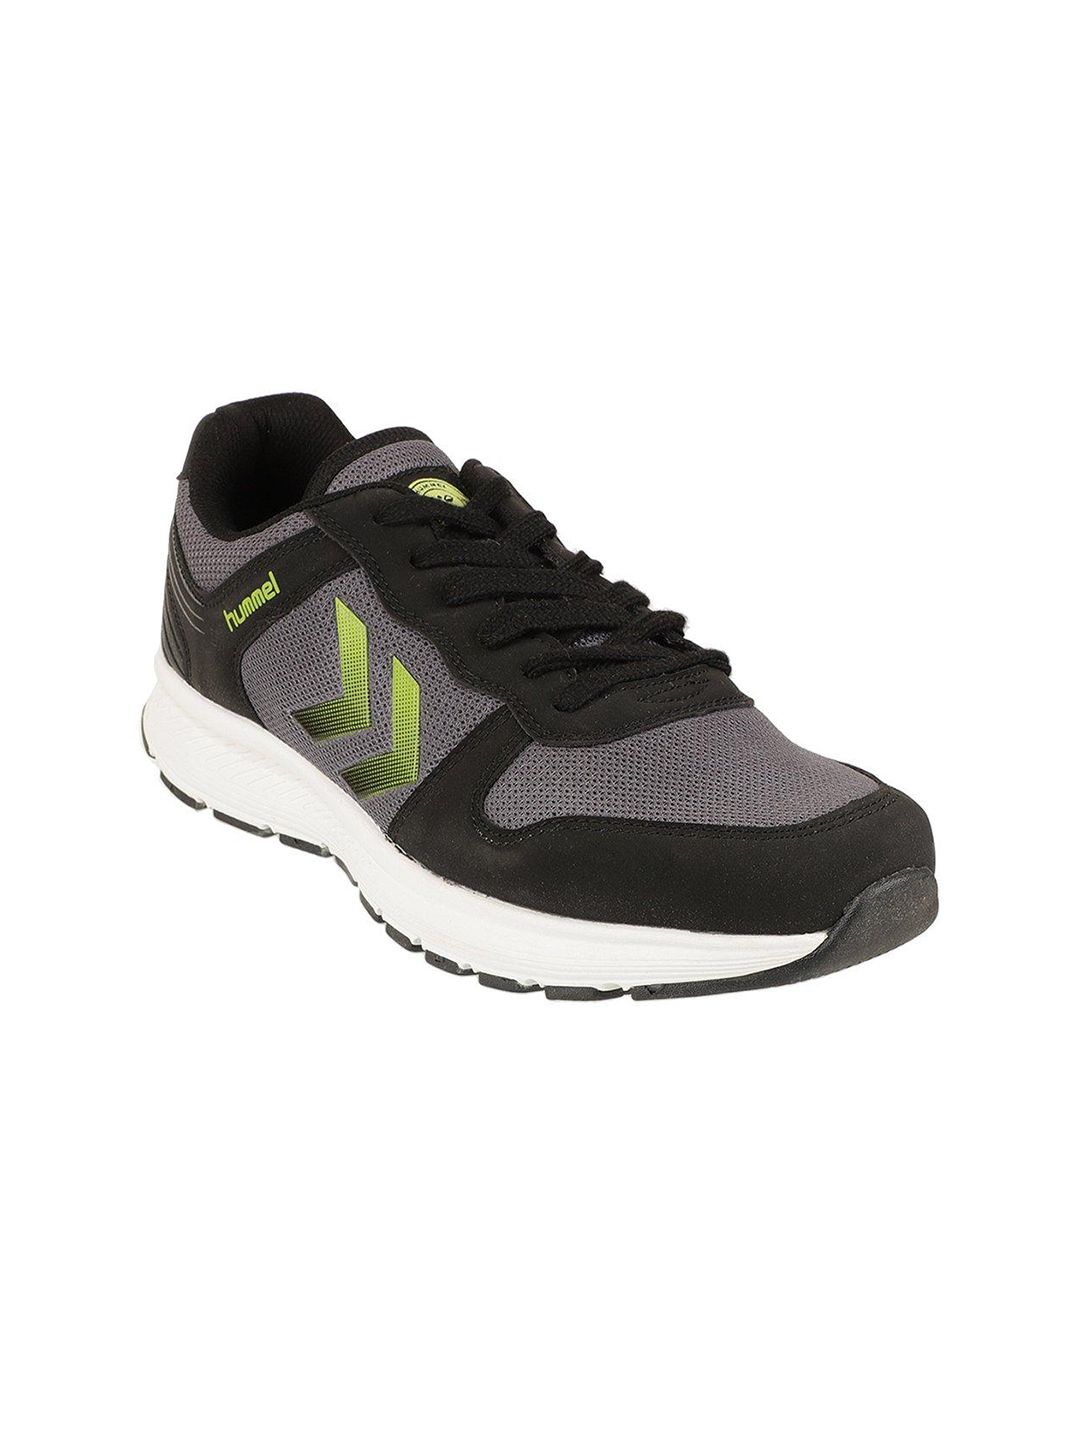 hummel Unisex Green Training or Gym Non-Marking Shoes Price in India